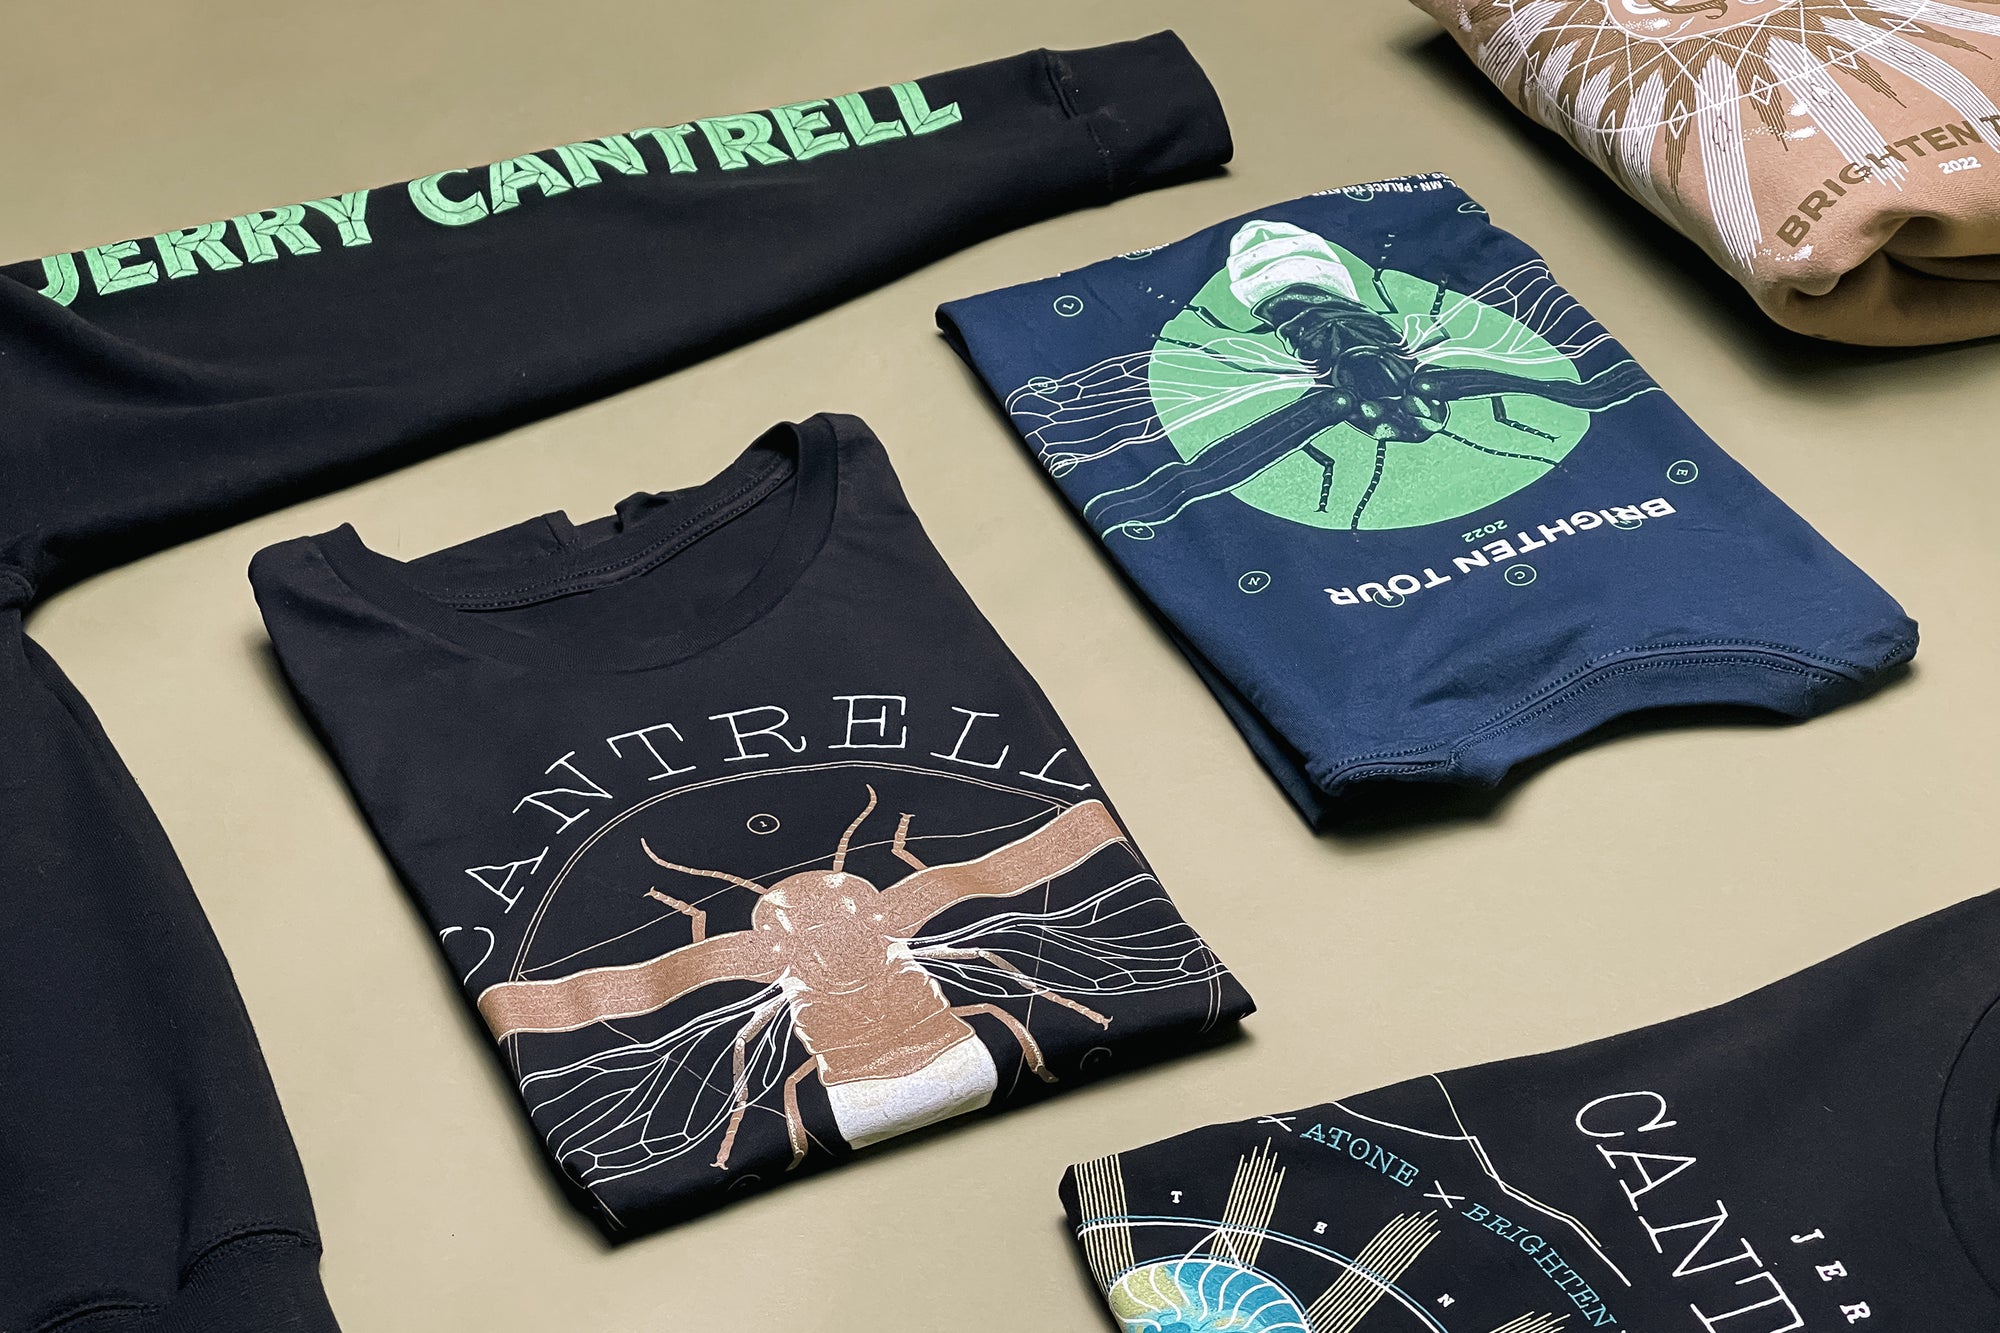 Jerry Cantrell Official Online Store